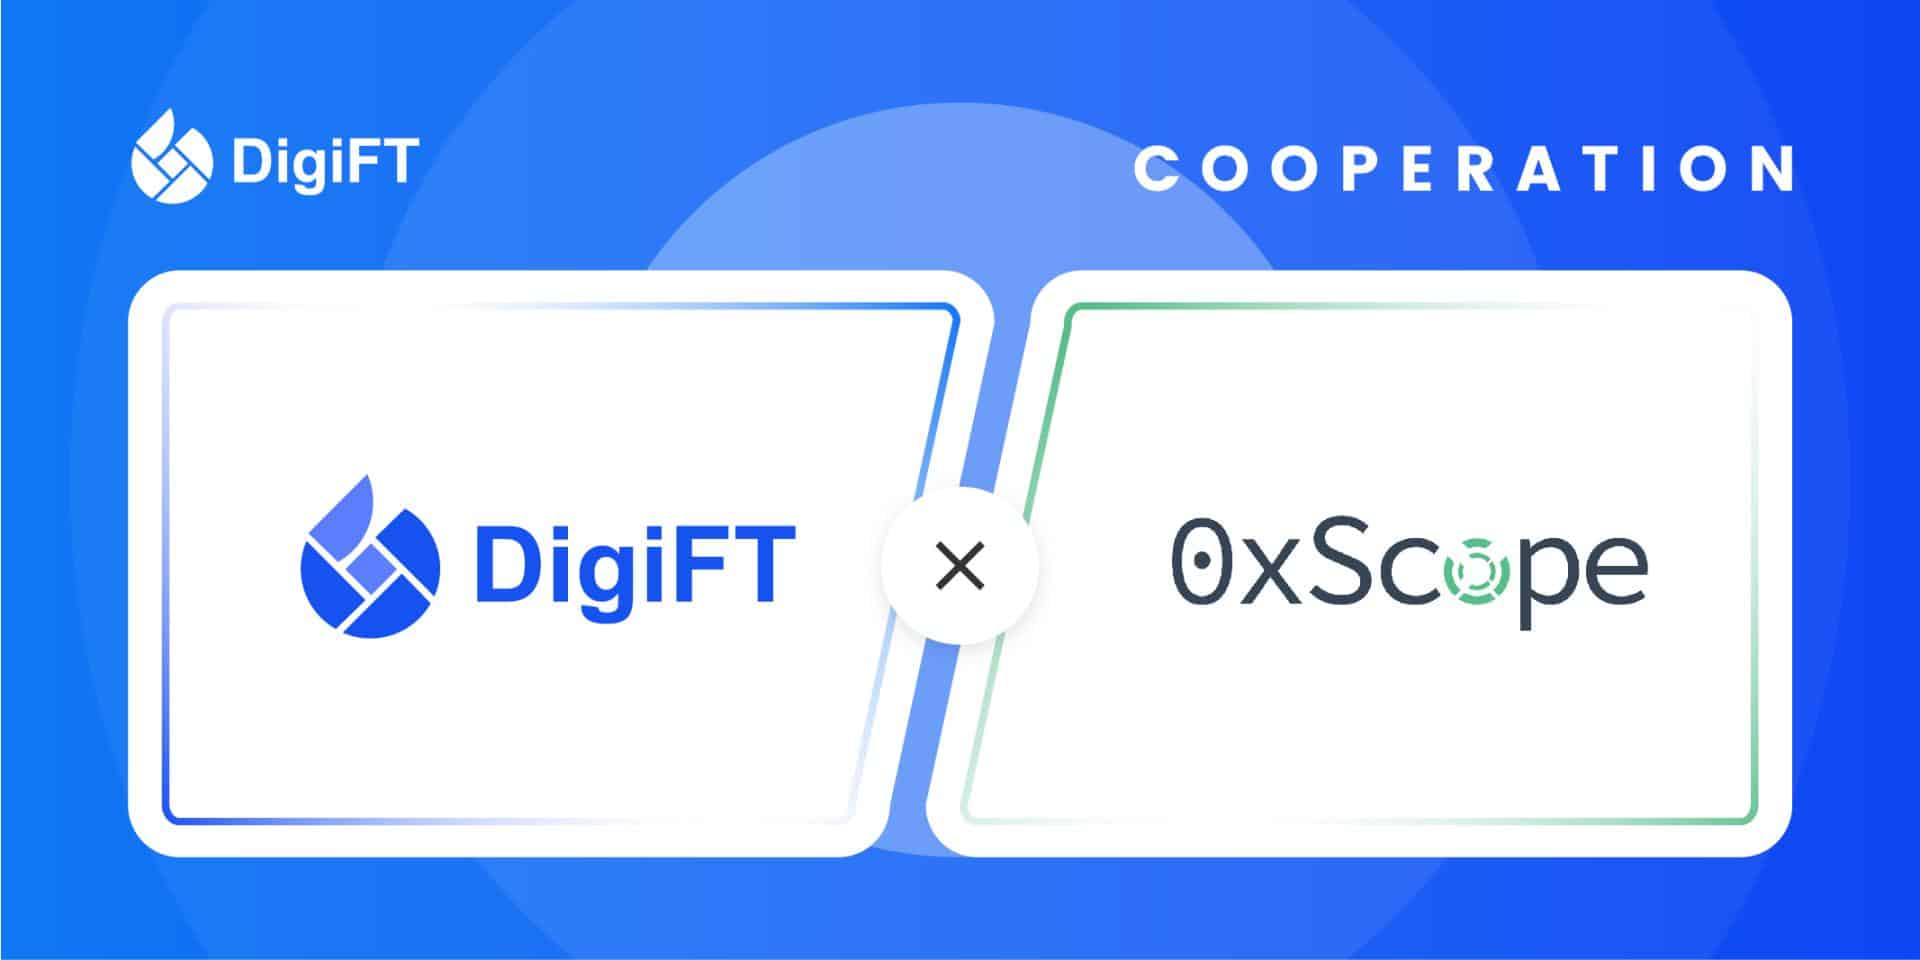 DigiFT and 0xScope to Develop DeFi Market Monitoring and Surveillance Applications